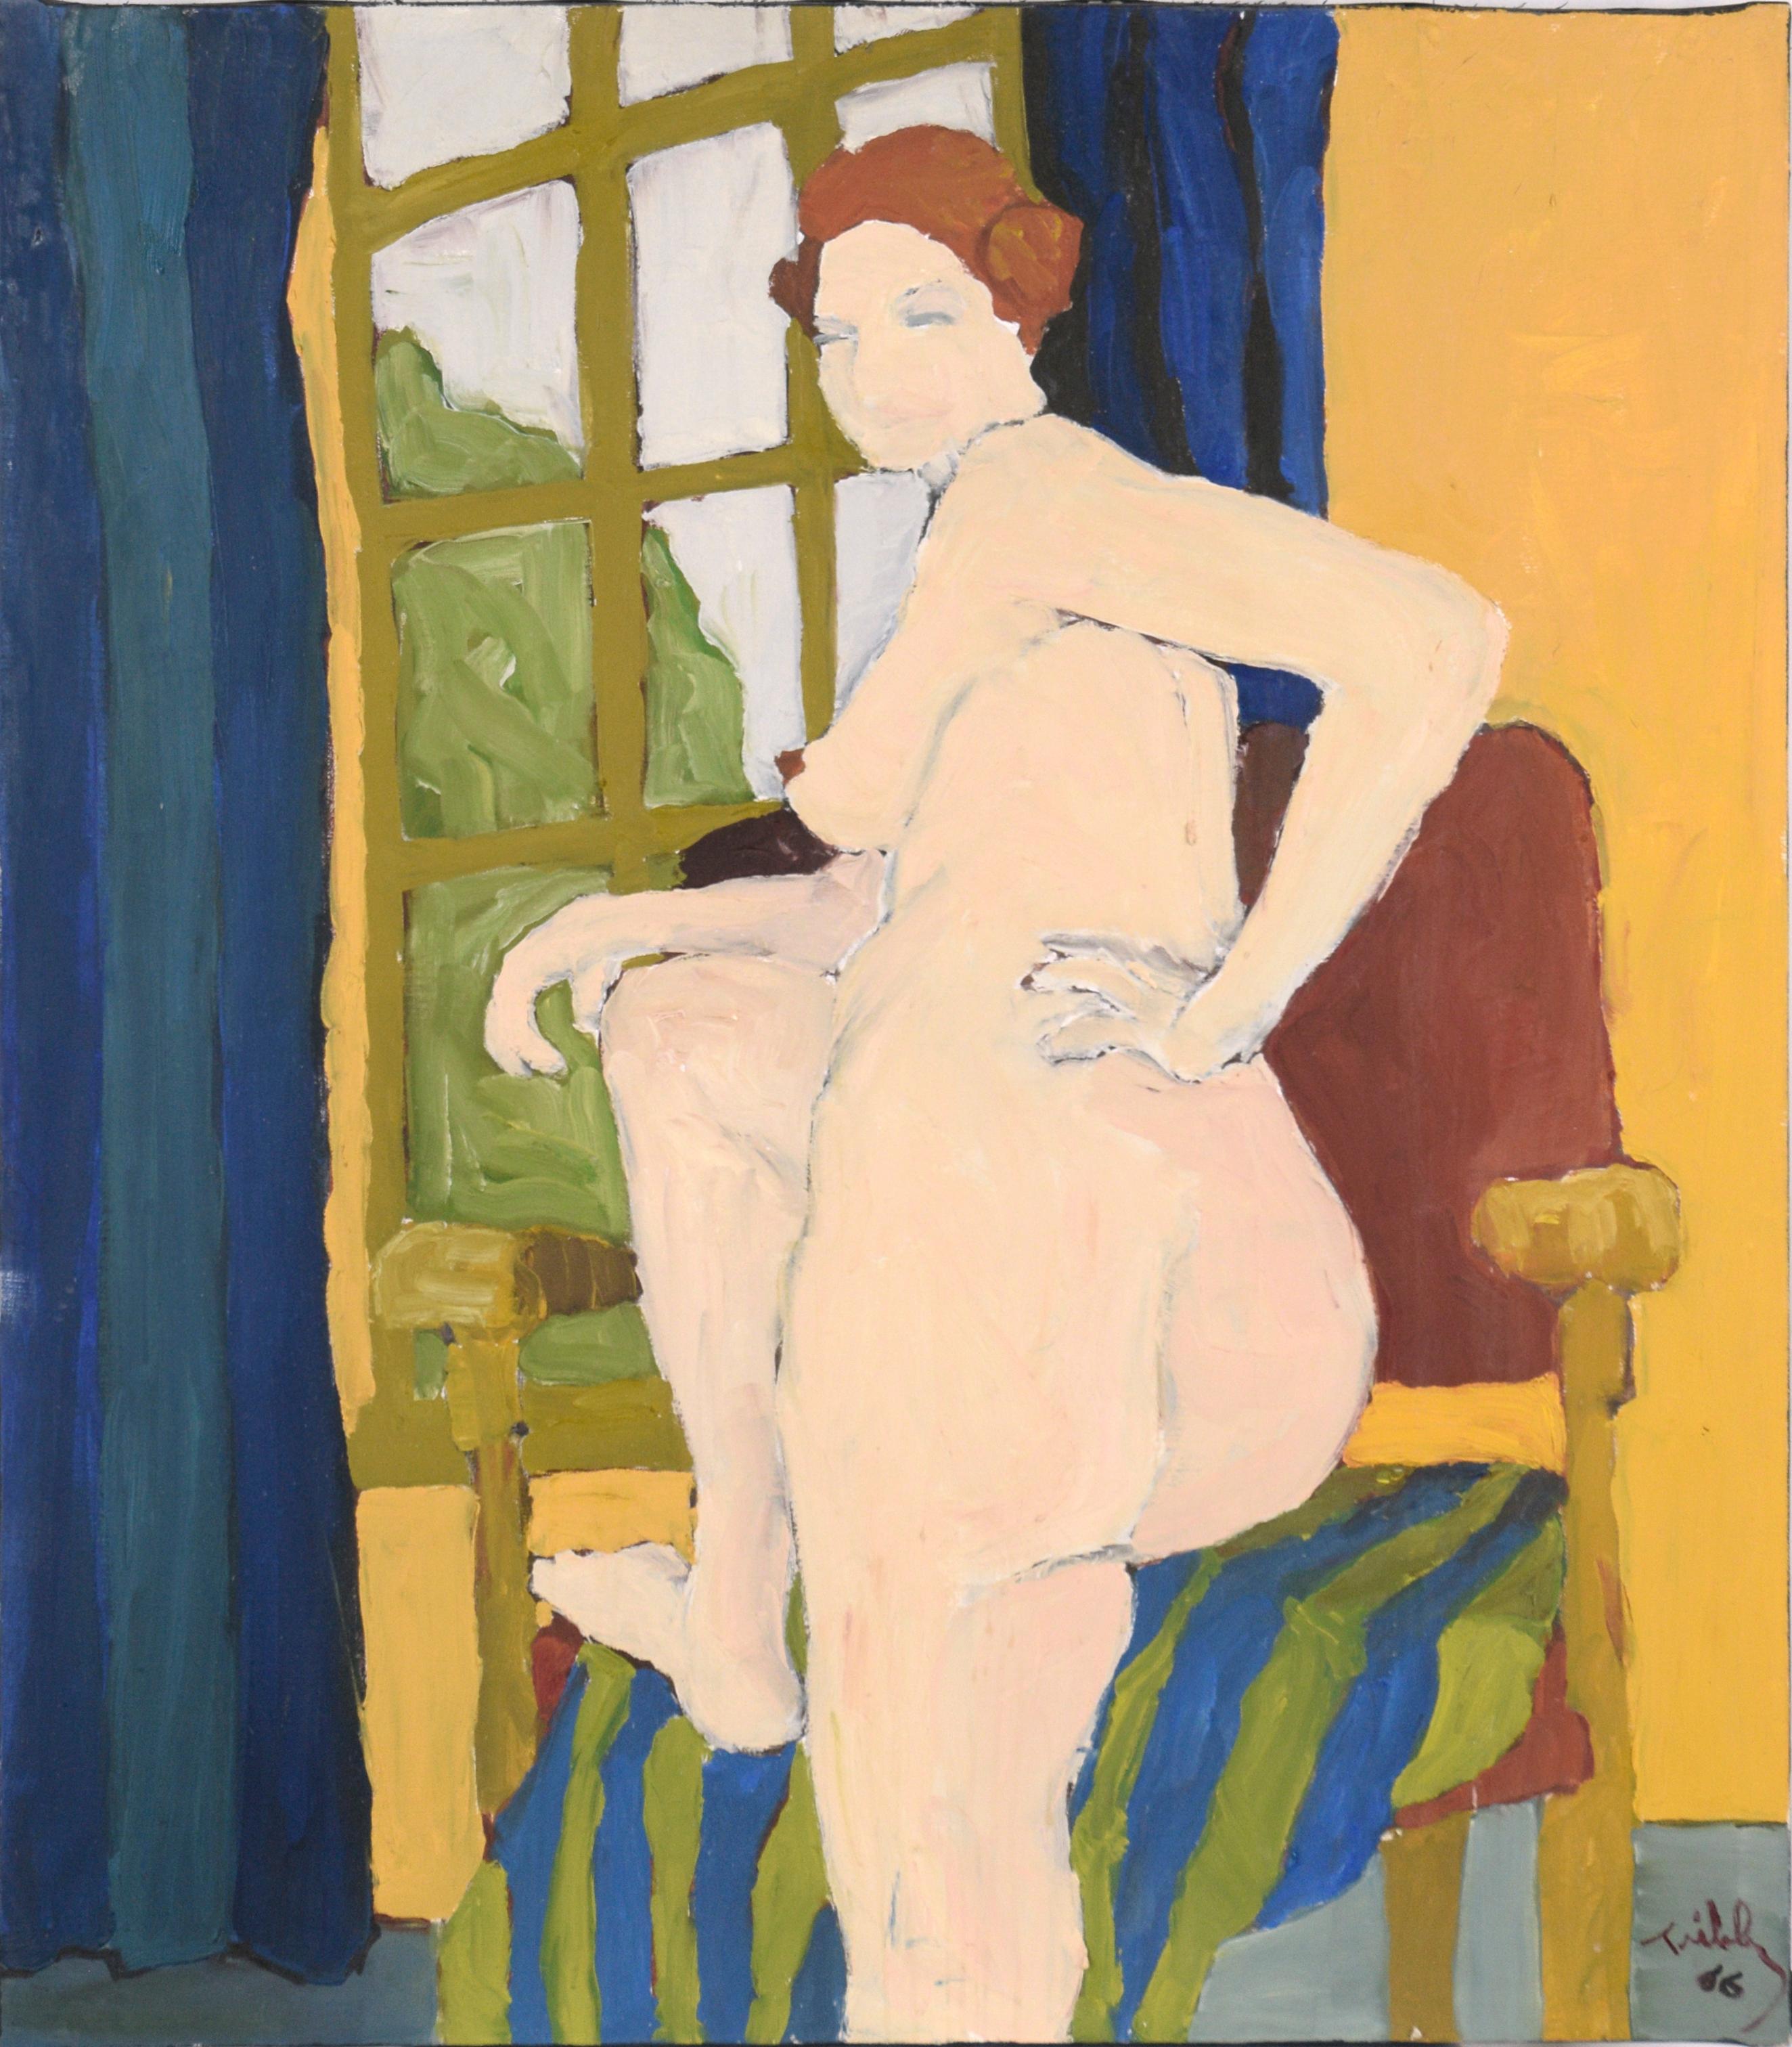 Thomas L. Tribby Nude Painting - Nude by the Window, San Francisco Bay Area Figurative Movement 1966